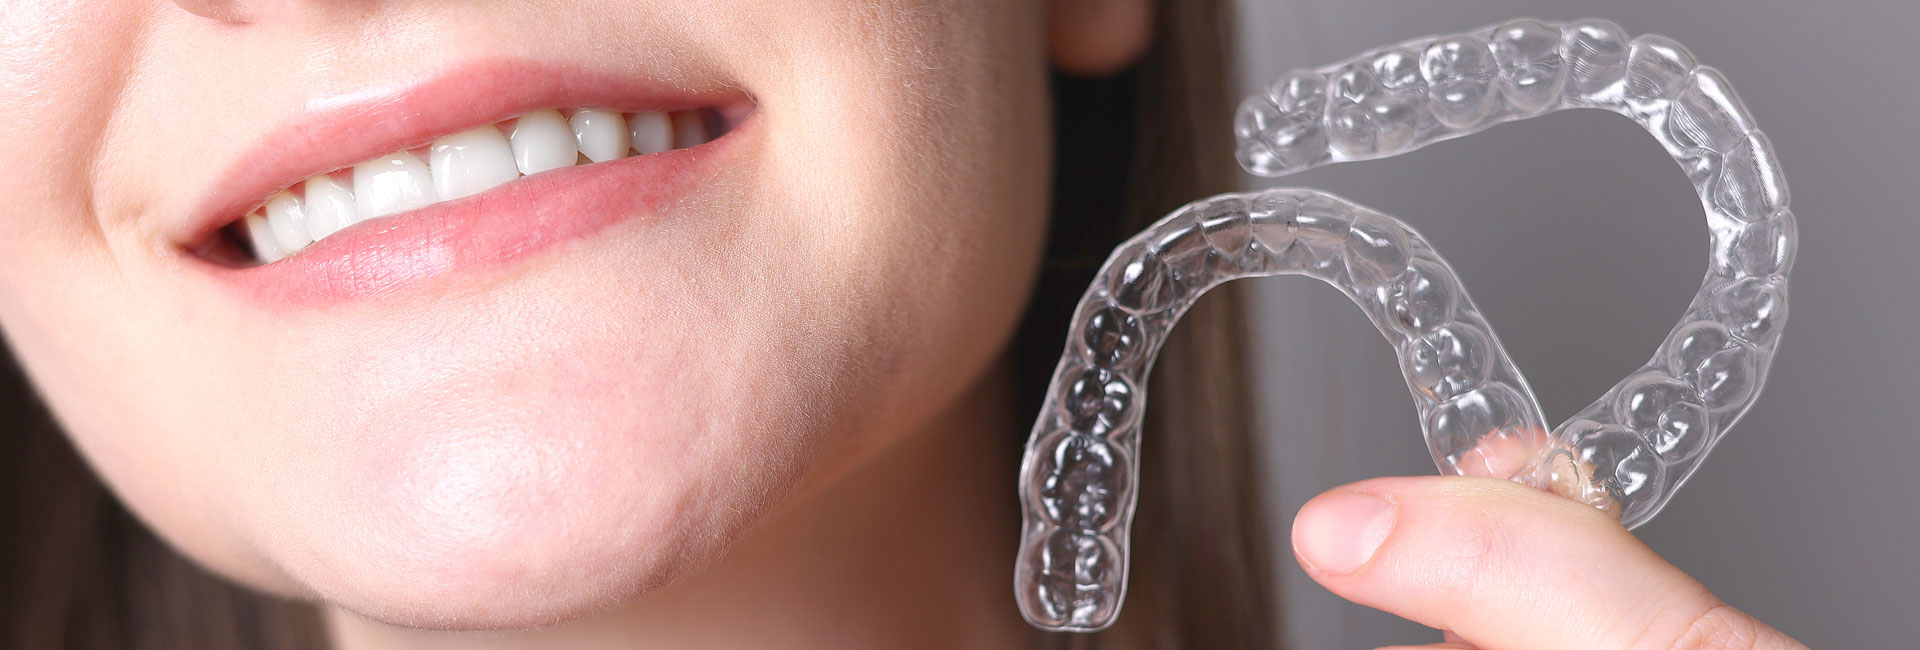 Woman holding a clear aligners